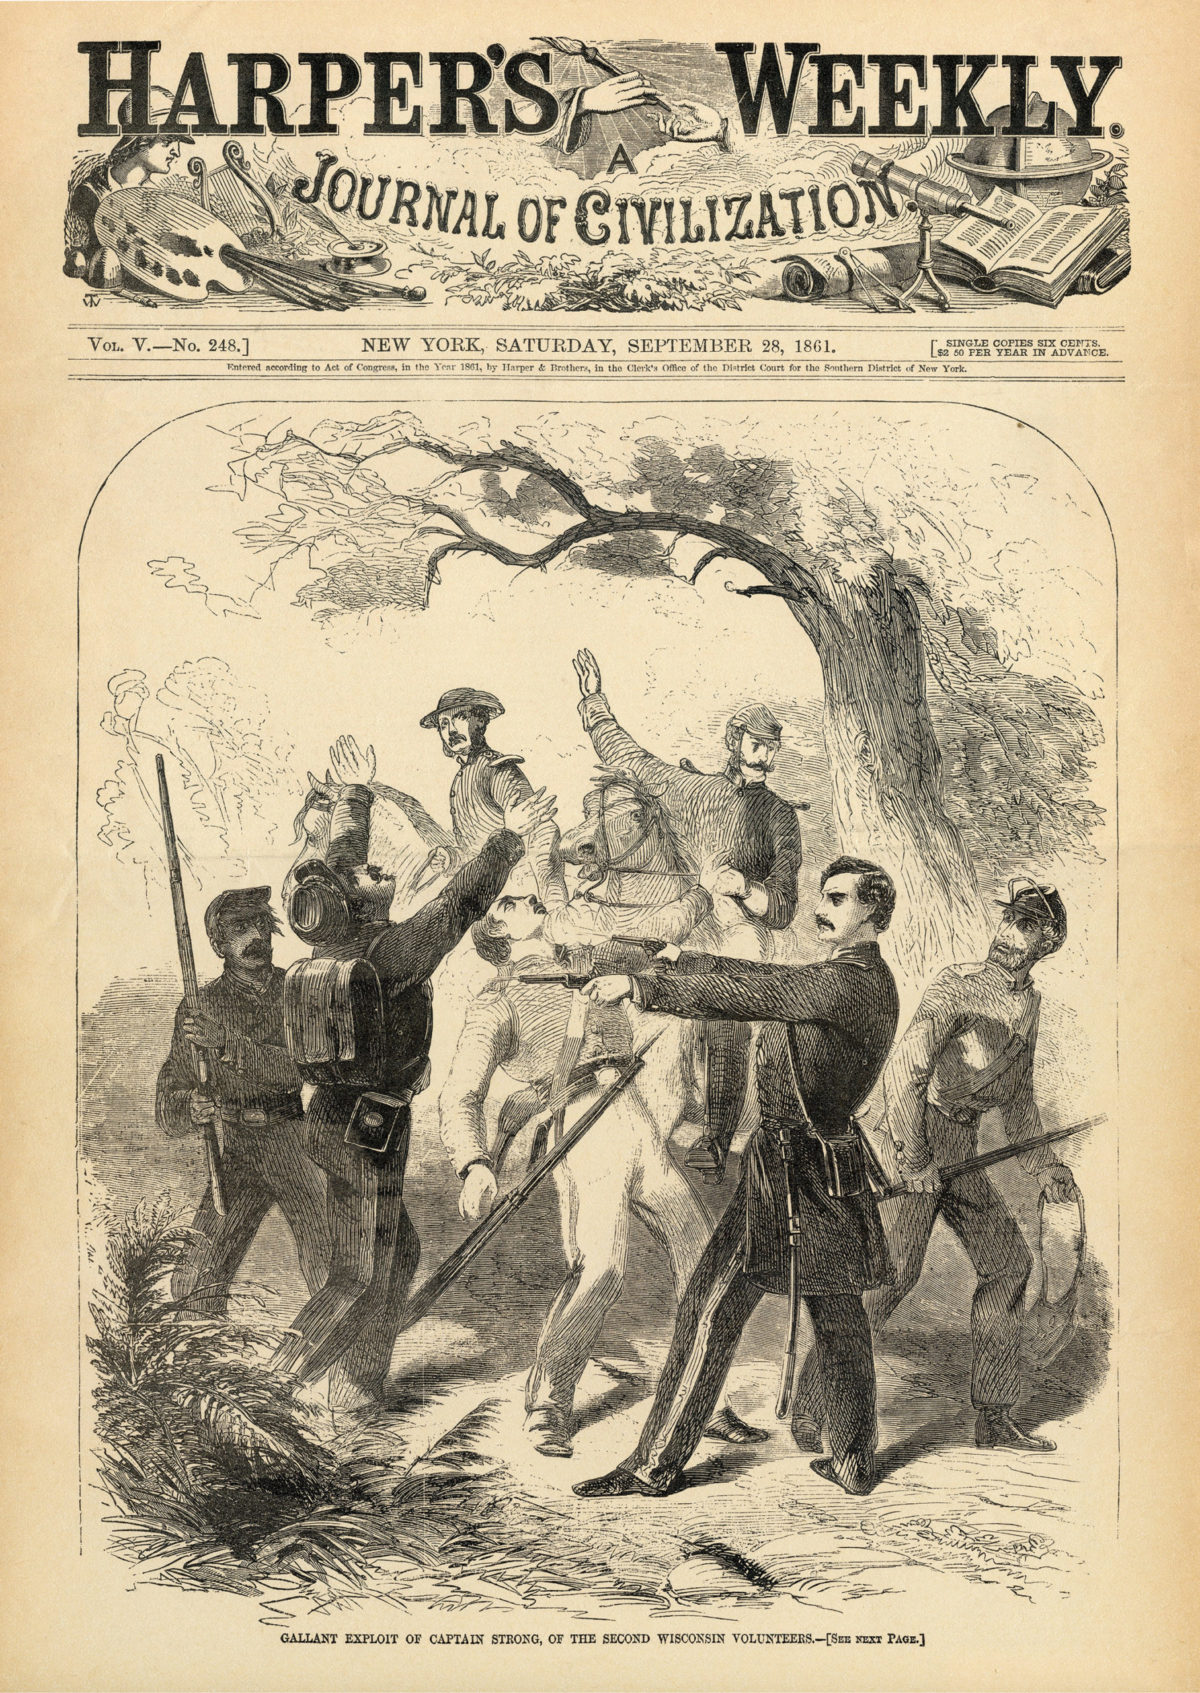 Harper’s Weekly cover showing Captain Strong's encounter